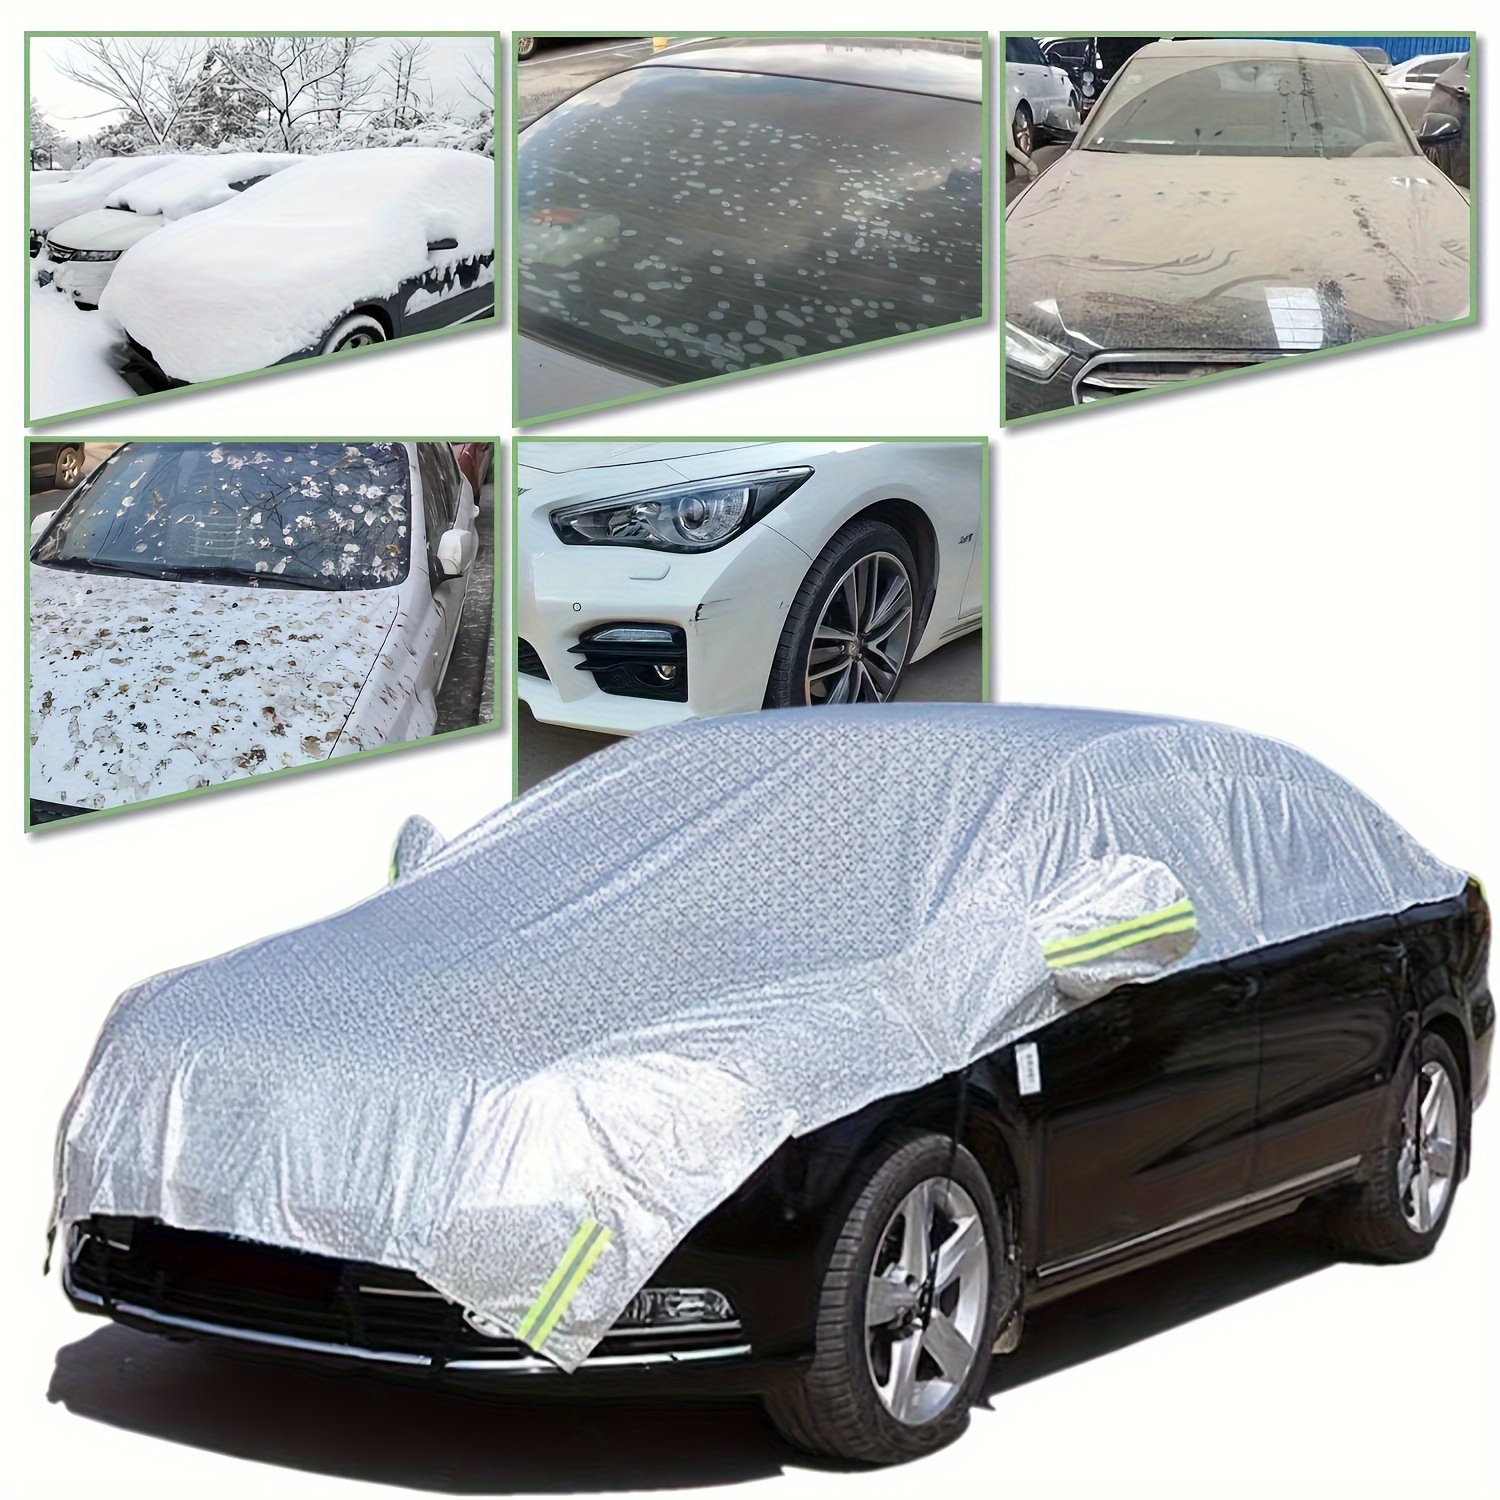 

All-weather Sedan Car Cover - Waterproof, Dustproof, Uv & Snow Resistant With Sun Shade For Windshield And Roof Protection